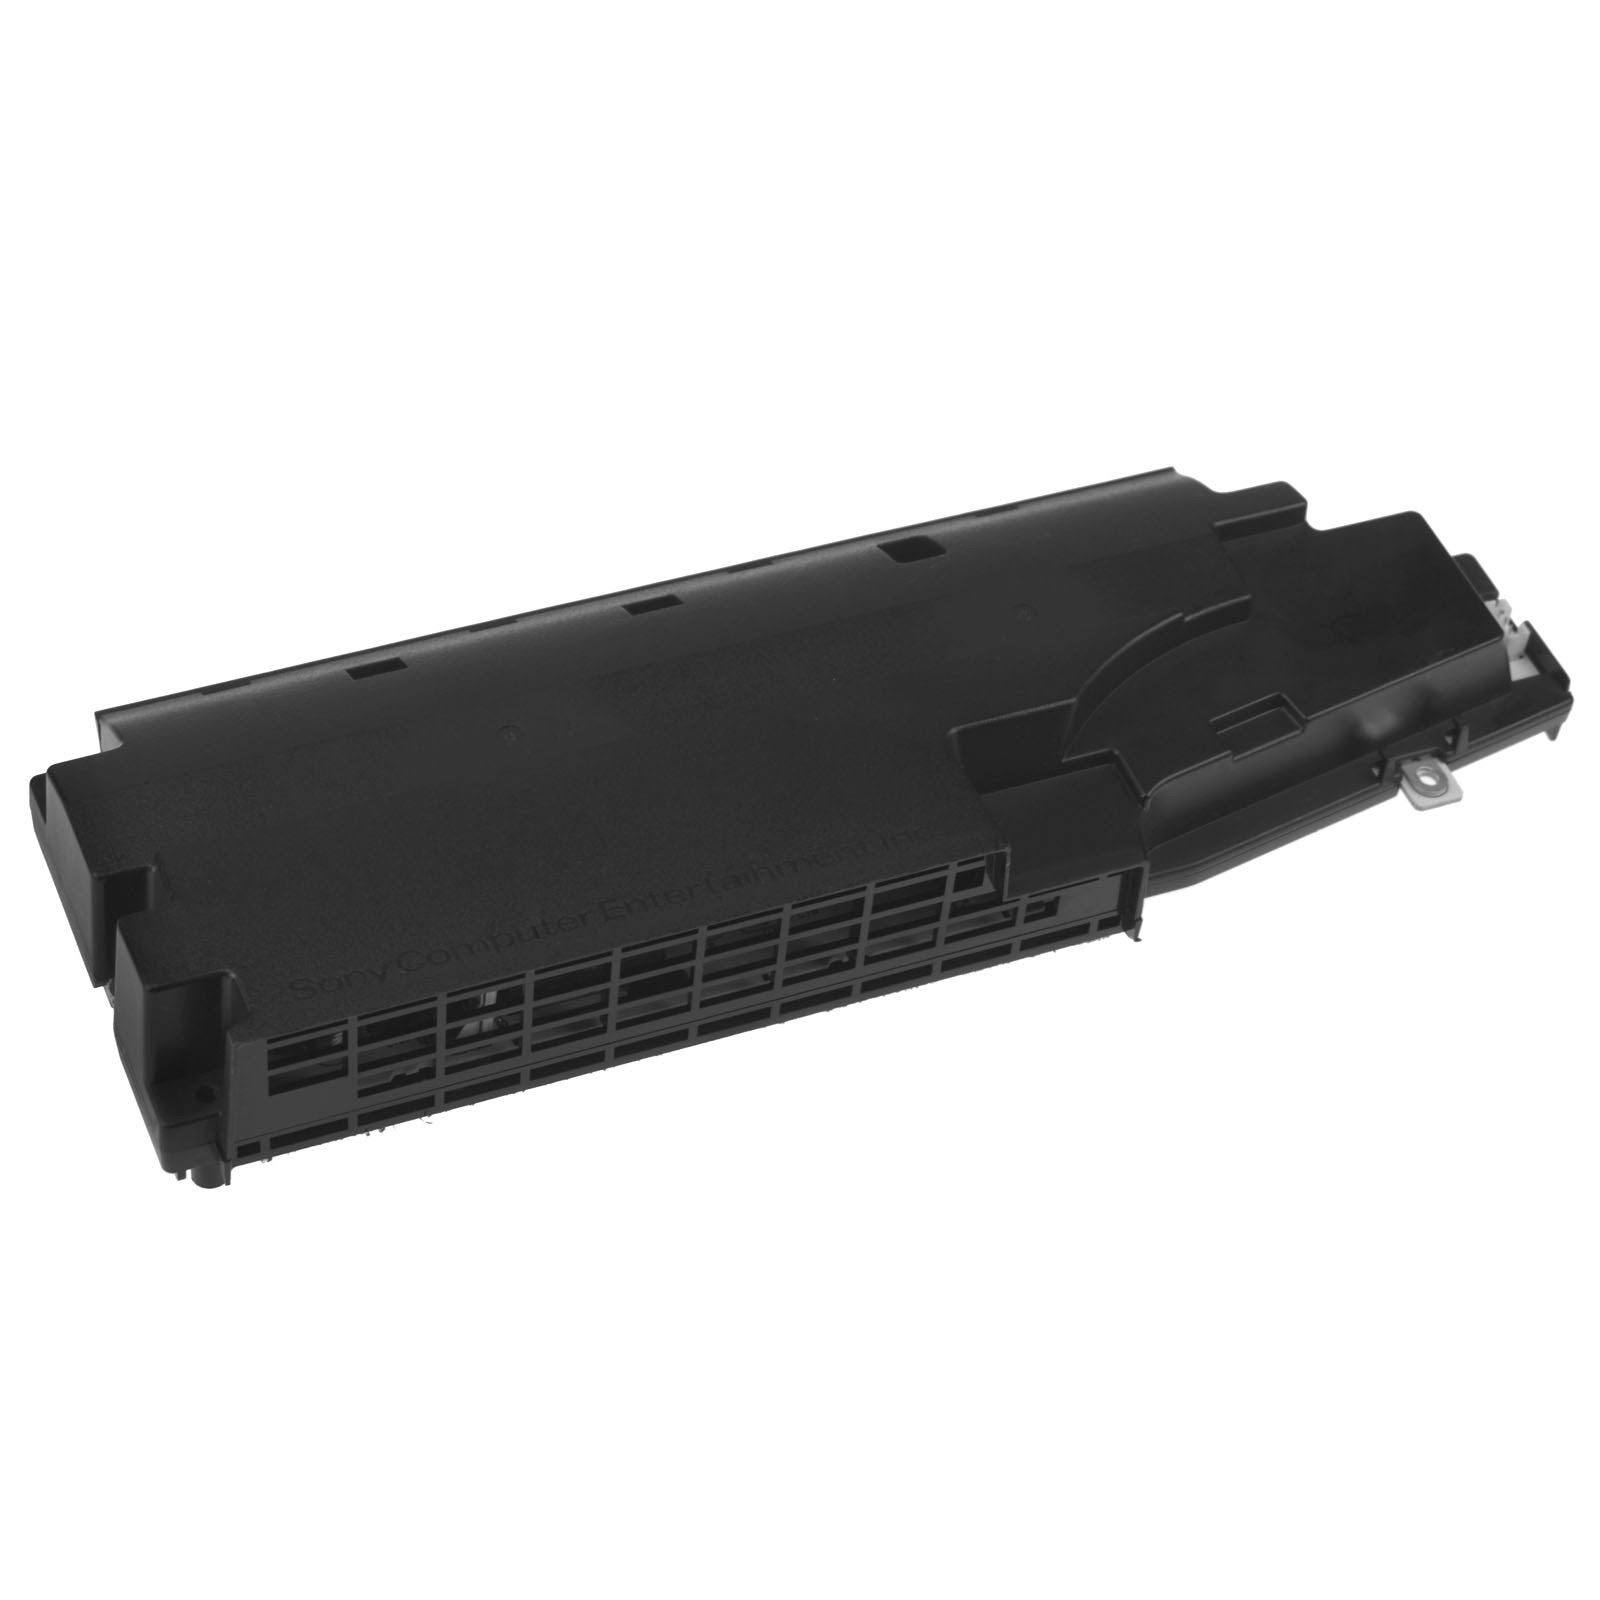 Gaming-Power Supply for PS3 Super Slim Refurbished APS-330